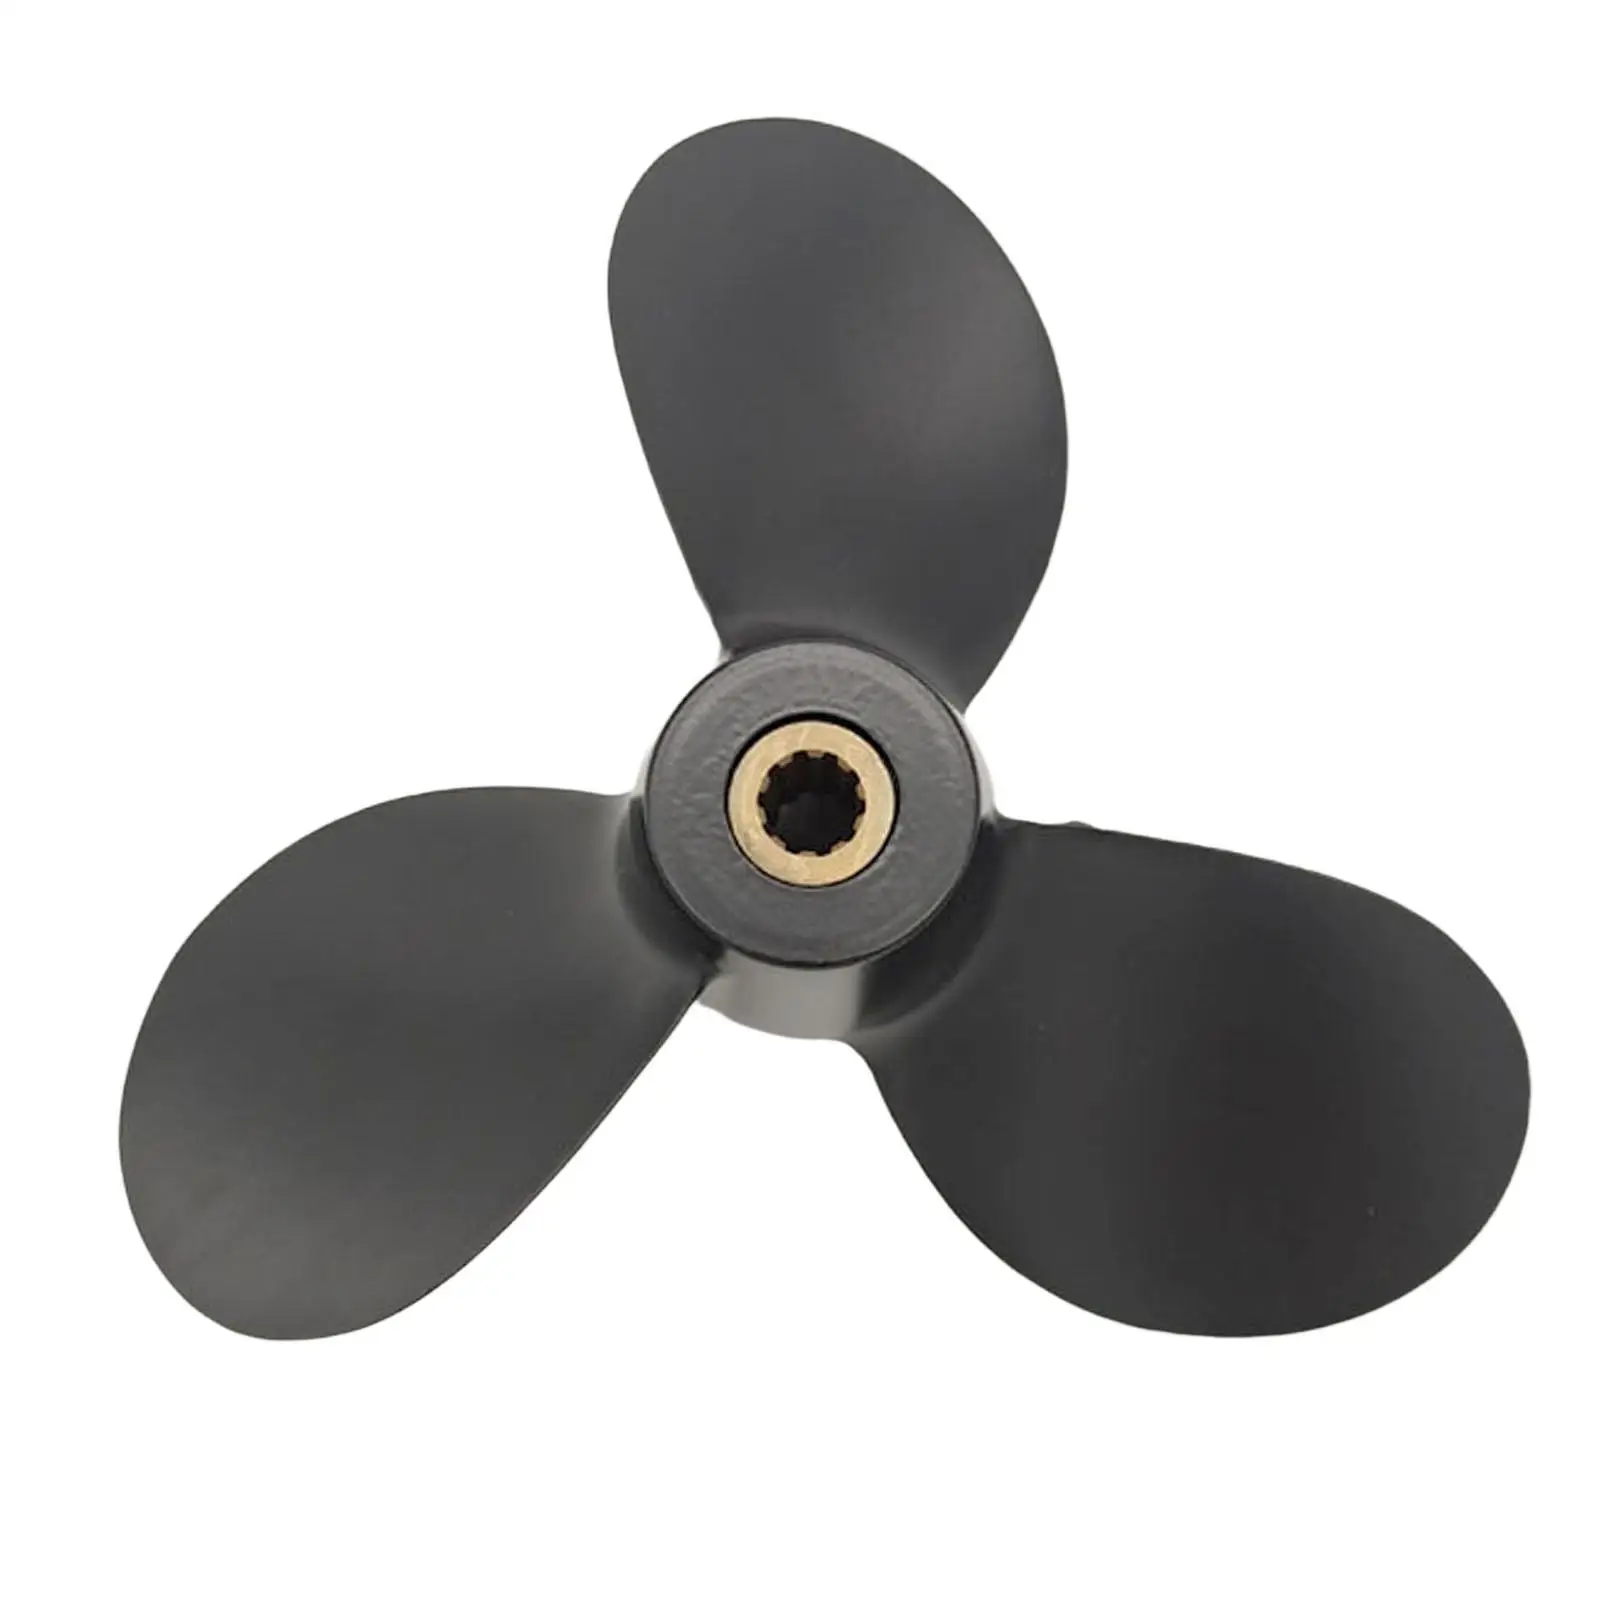 Marine Boat Propeller 7 1/2x7 58111-98651-019 Accessory Replacement Professional